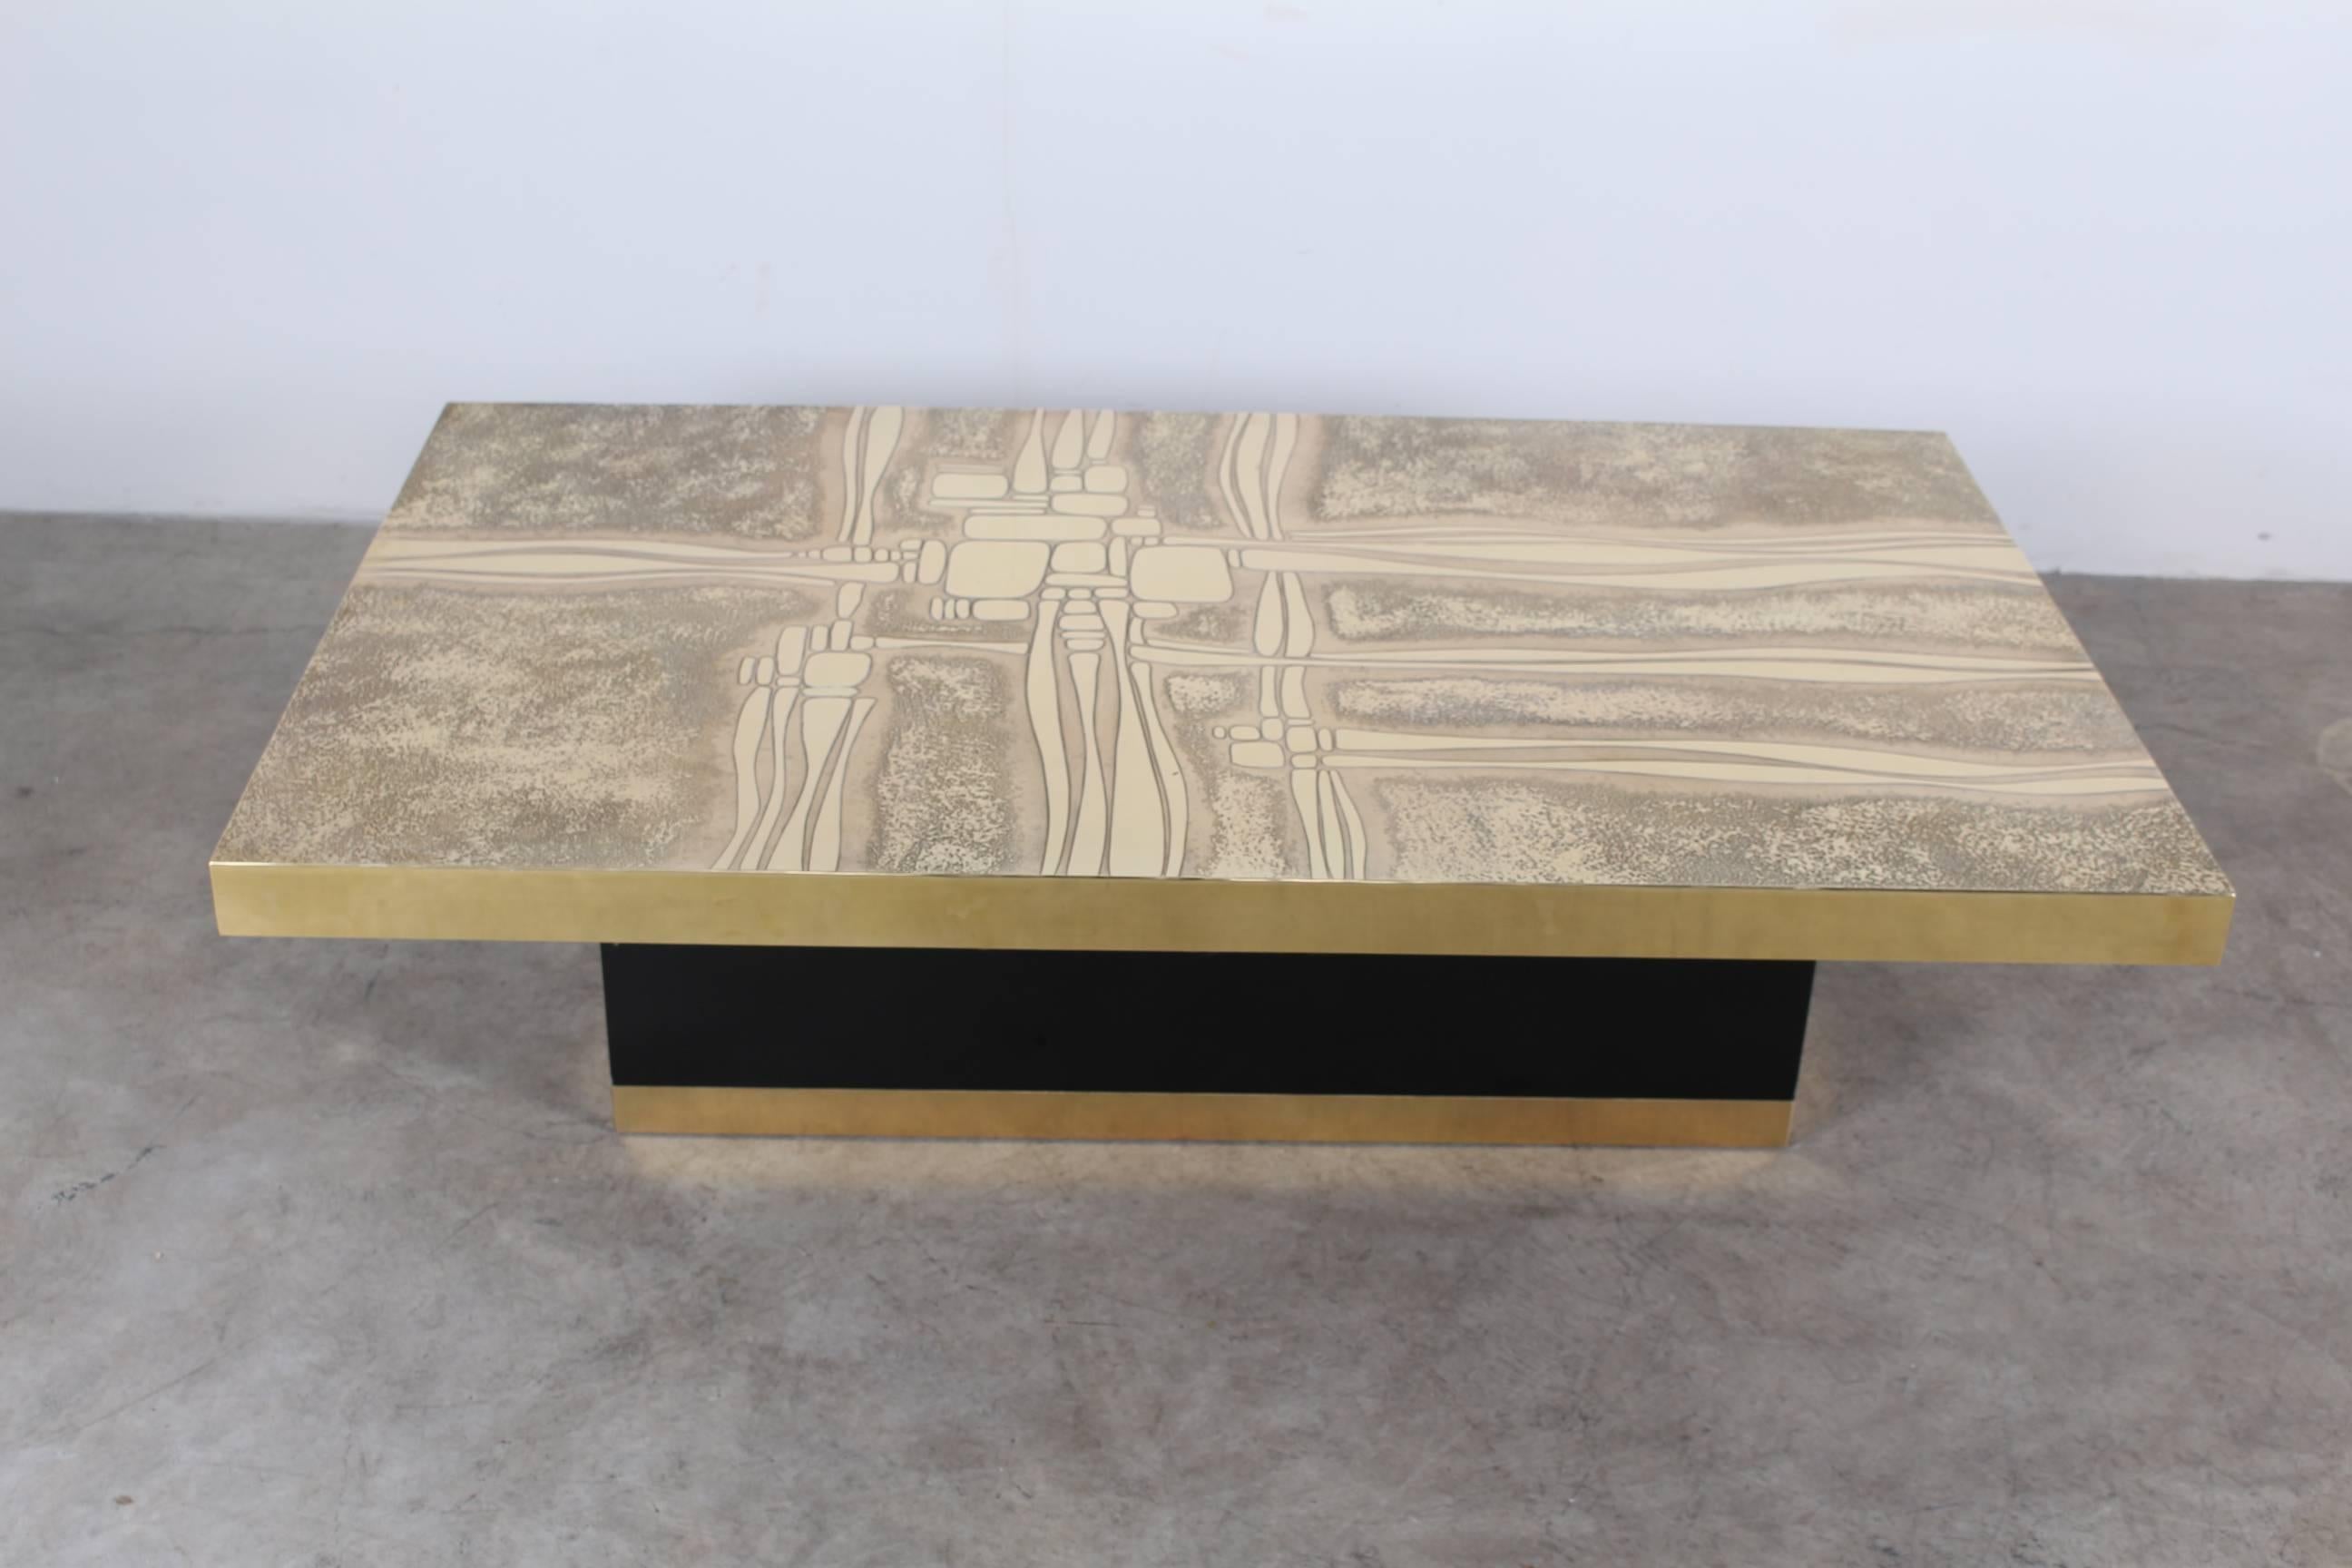 Stunning coffee table by Lova Creation, Belgium, circa 1970.

The table is in perfect condition, the leg is in black formica or plexiglass with a brass border.

Signed 